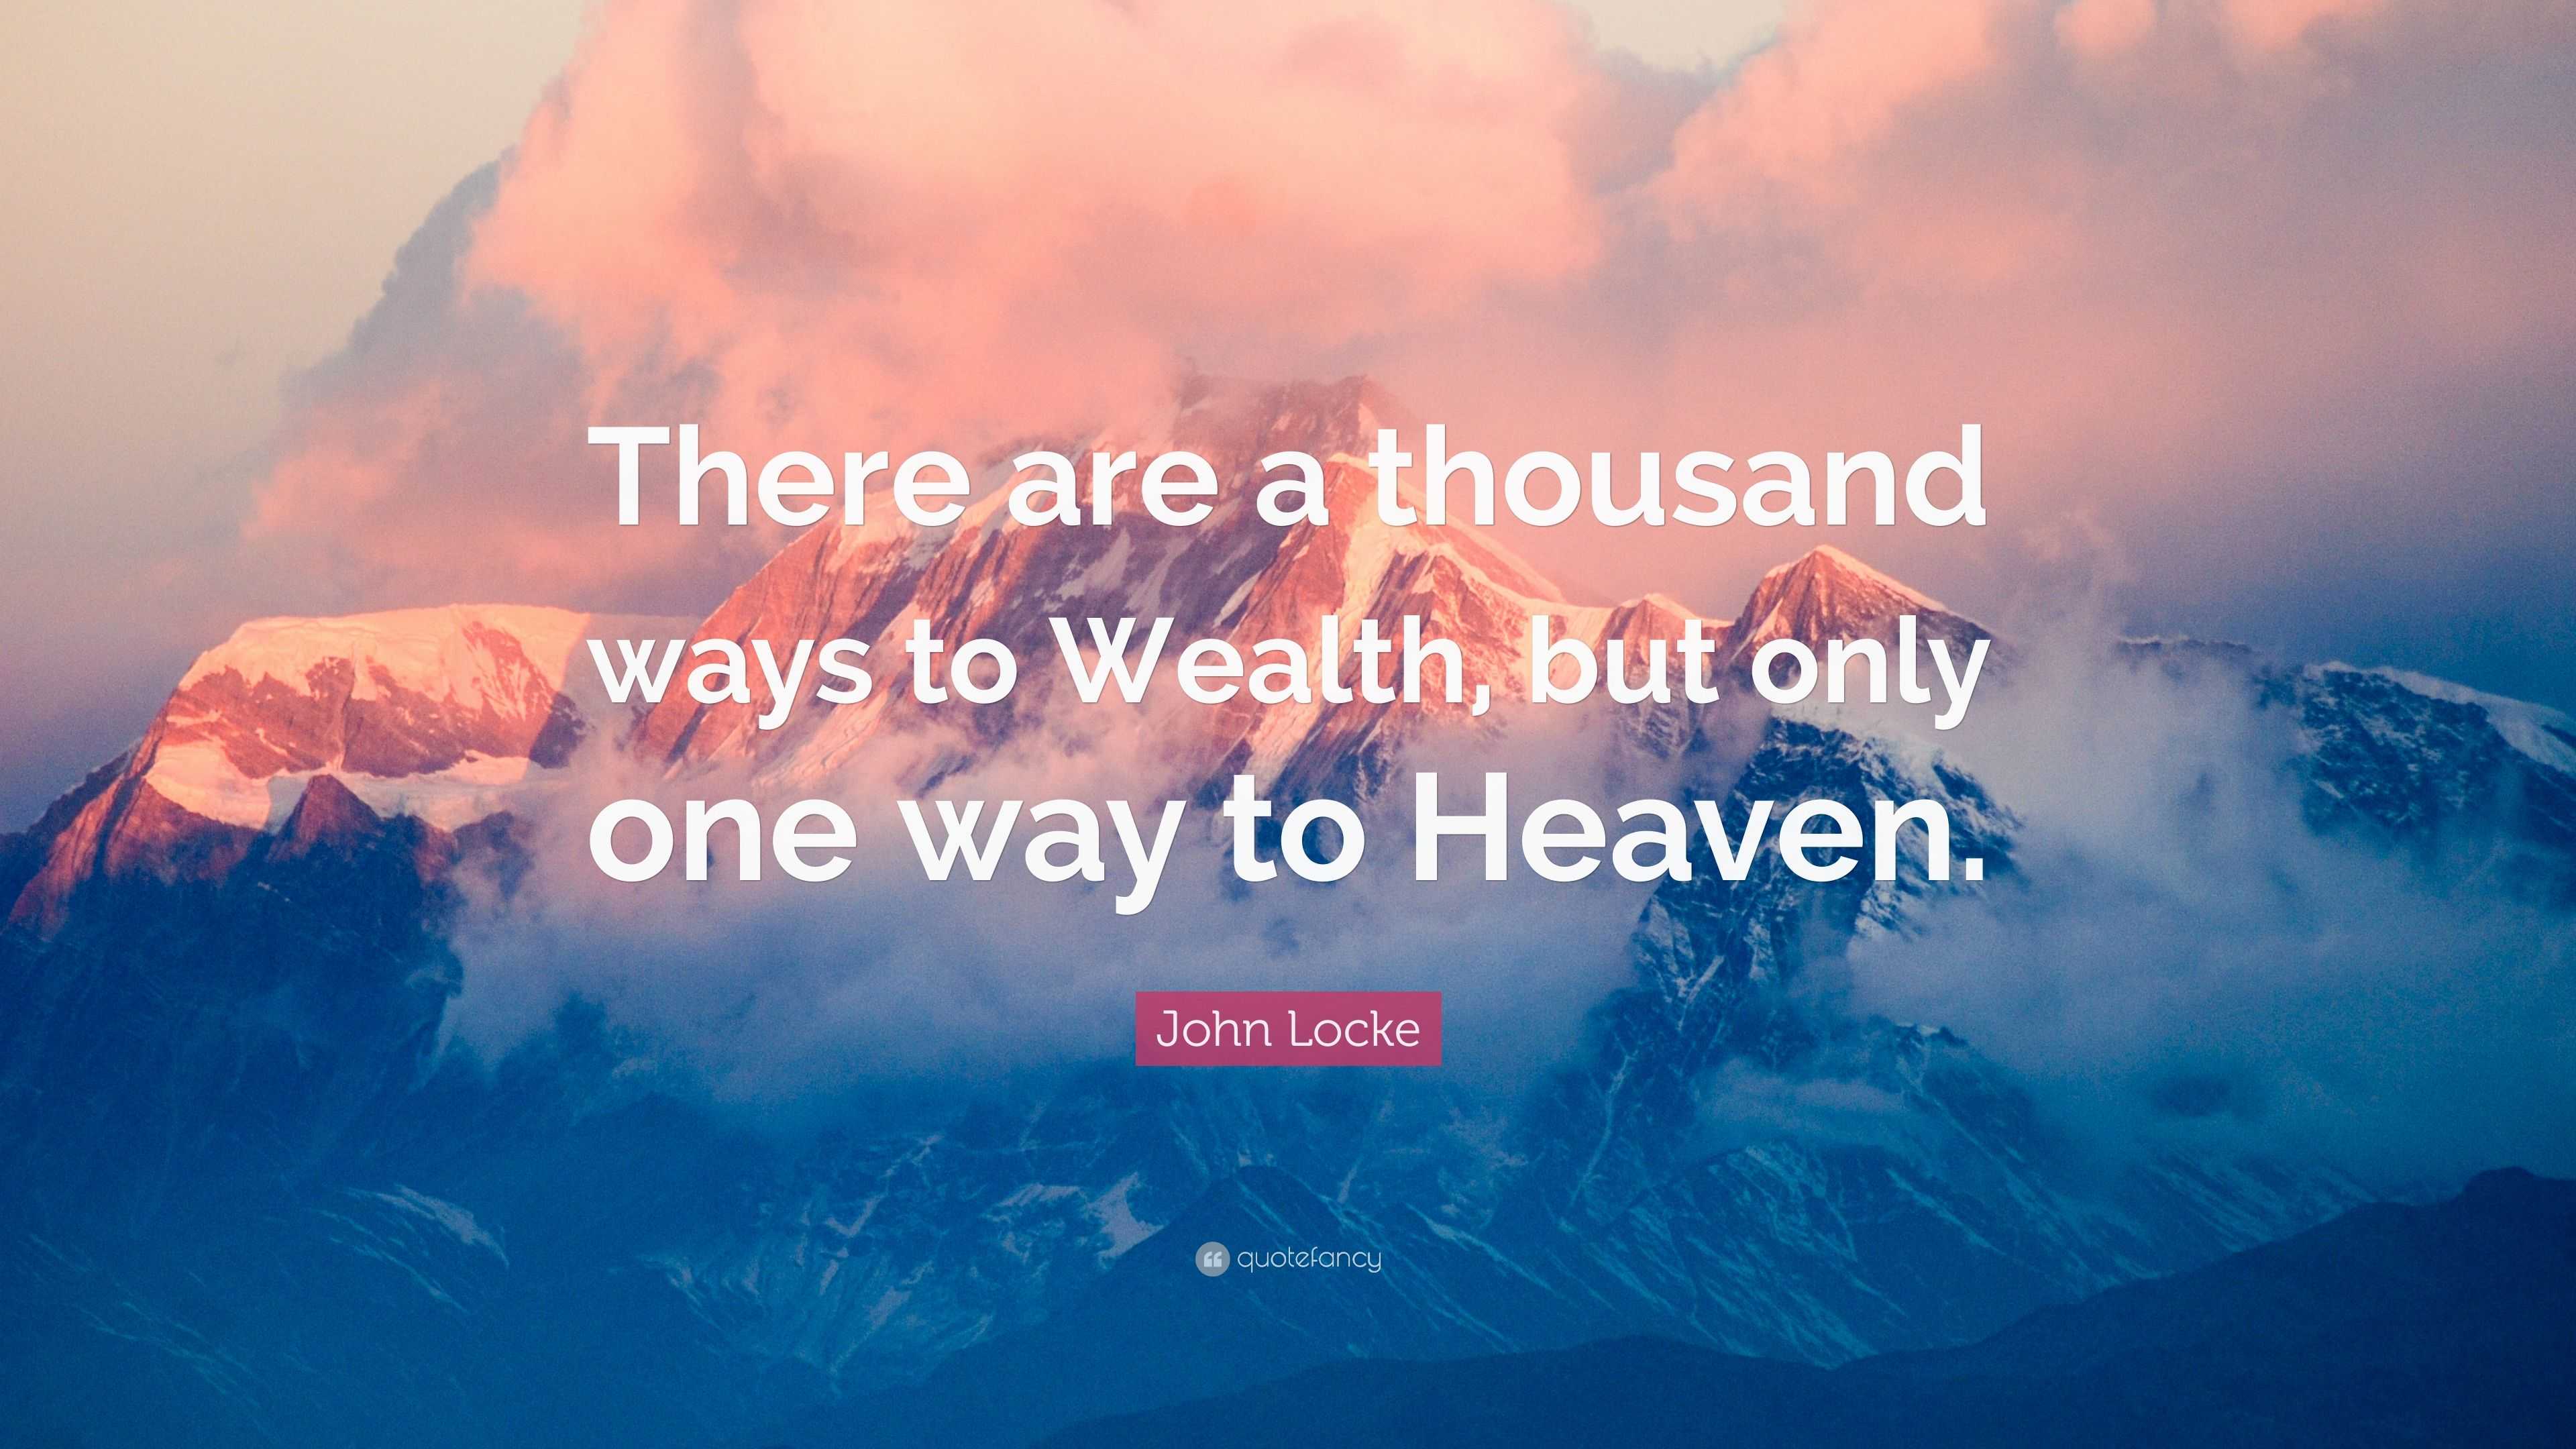 John Locke Quote There Are A Thousand Ways To Wealth But Only One Way To Heaven